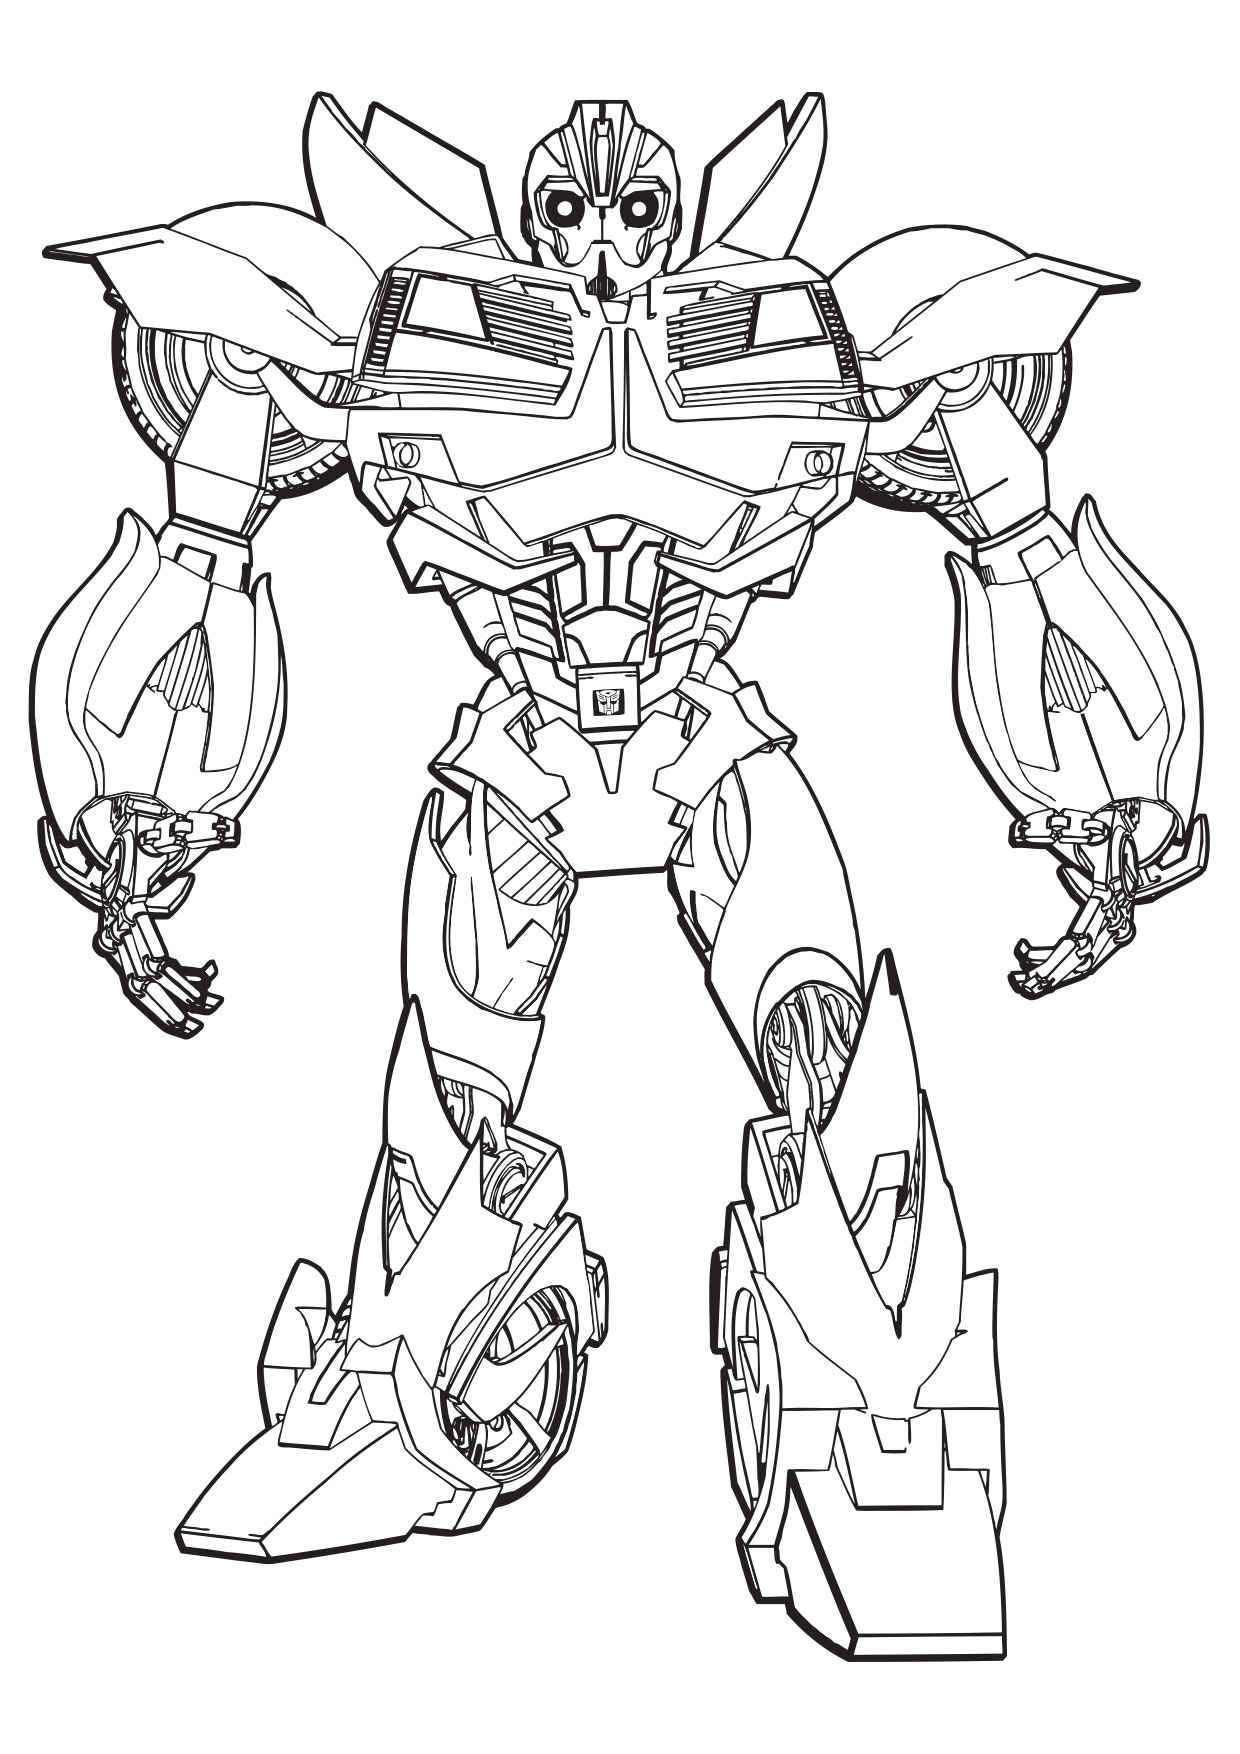 transformers-bumblebee-coloring-pages-transformers-2-transformers-coloring-pages-from.jpg